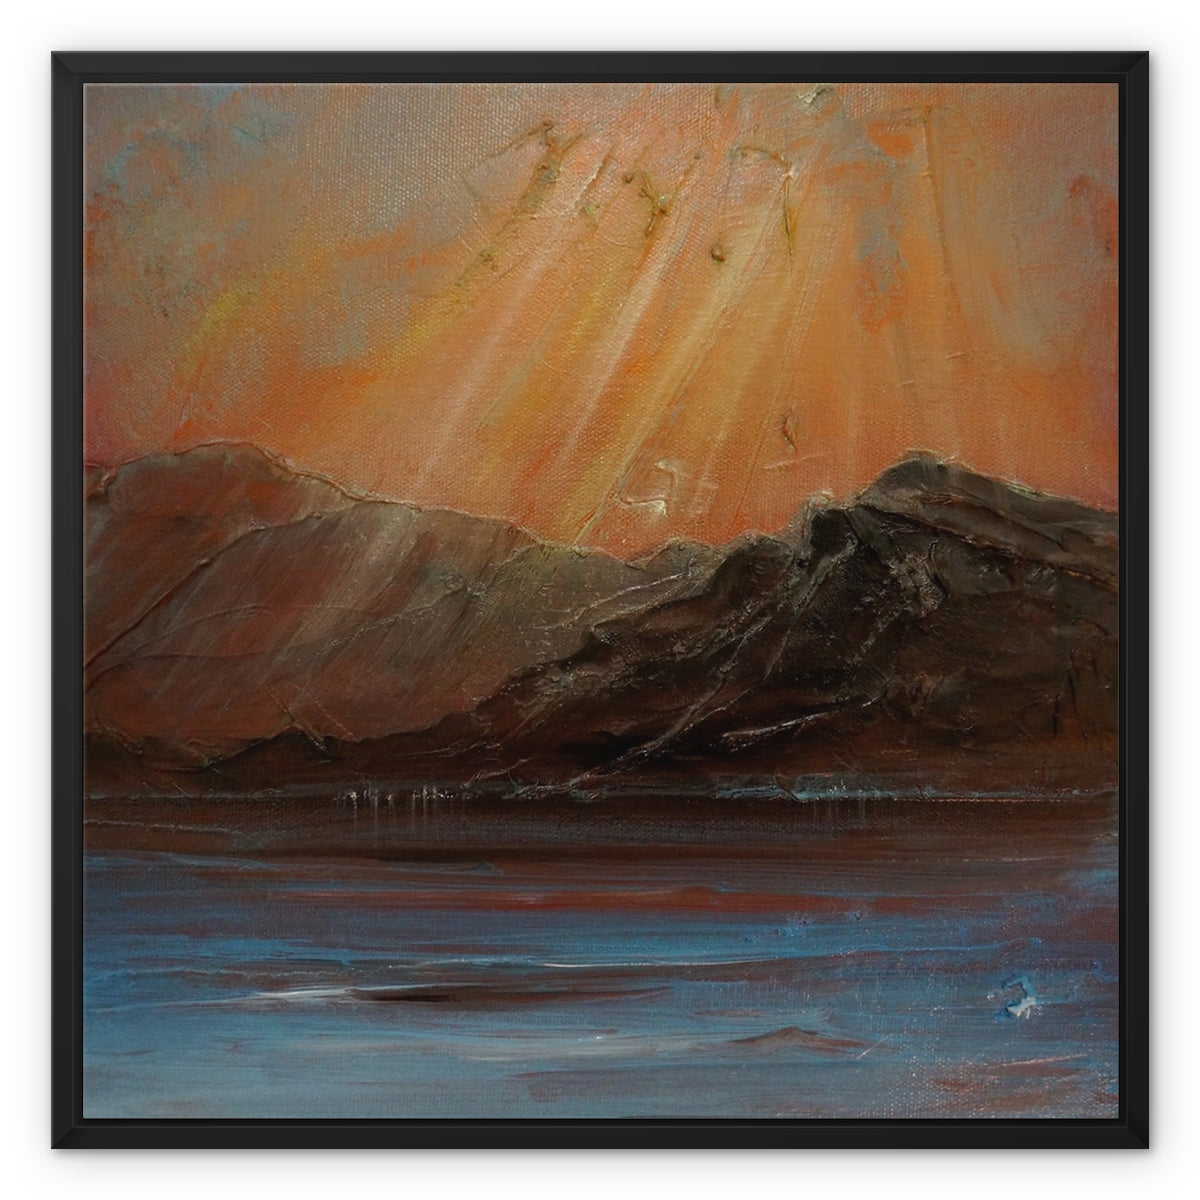 Torridon ii Painting | Framed Canvas From Scotland-Floating Framed Canvas Prints-Scottish Lochs & Mountains Art Gallery-24"x24"-Black Frame-Paintings, Prints, Homeware, Art Gifts From Scotland By Scottish Artist Kevin Hunter